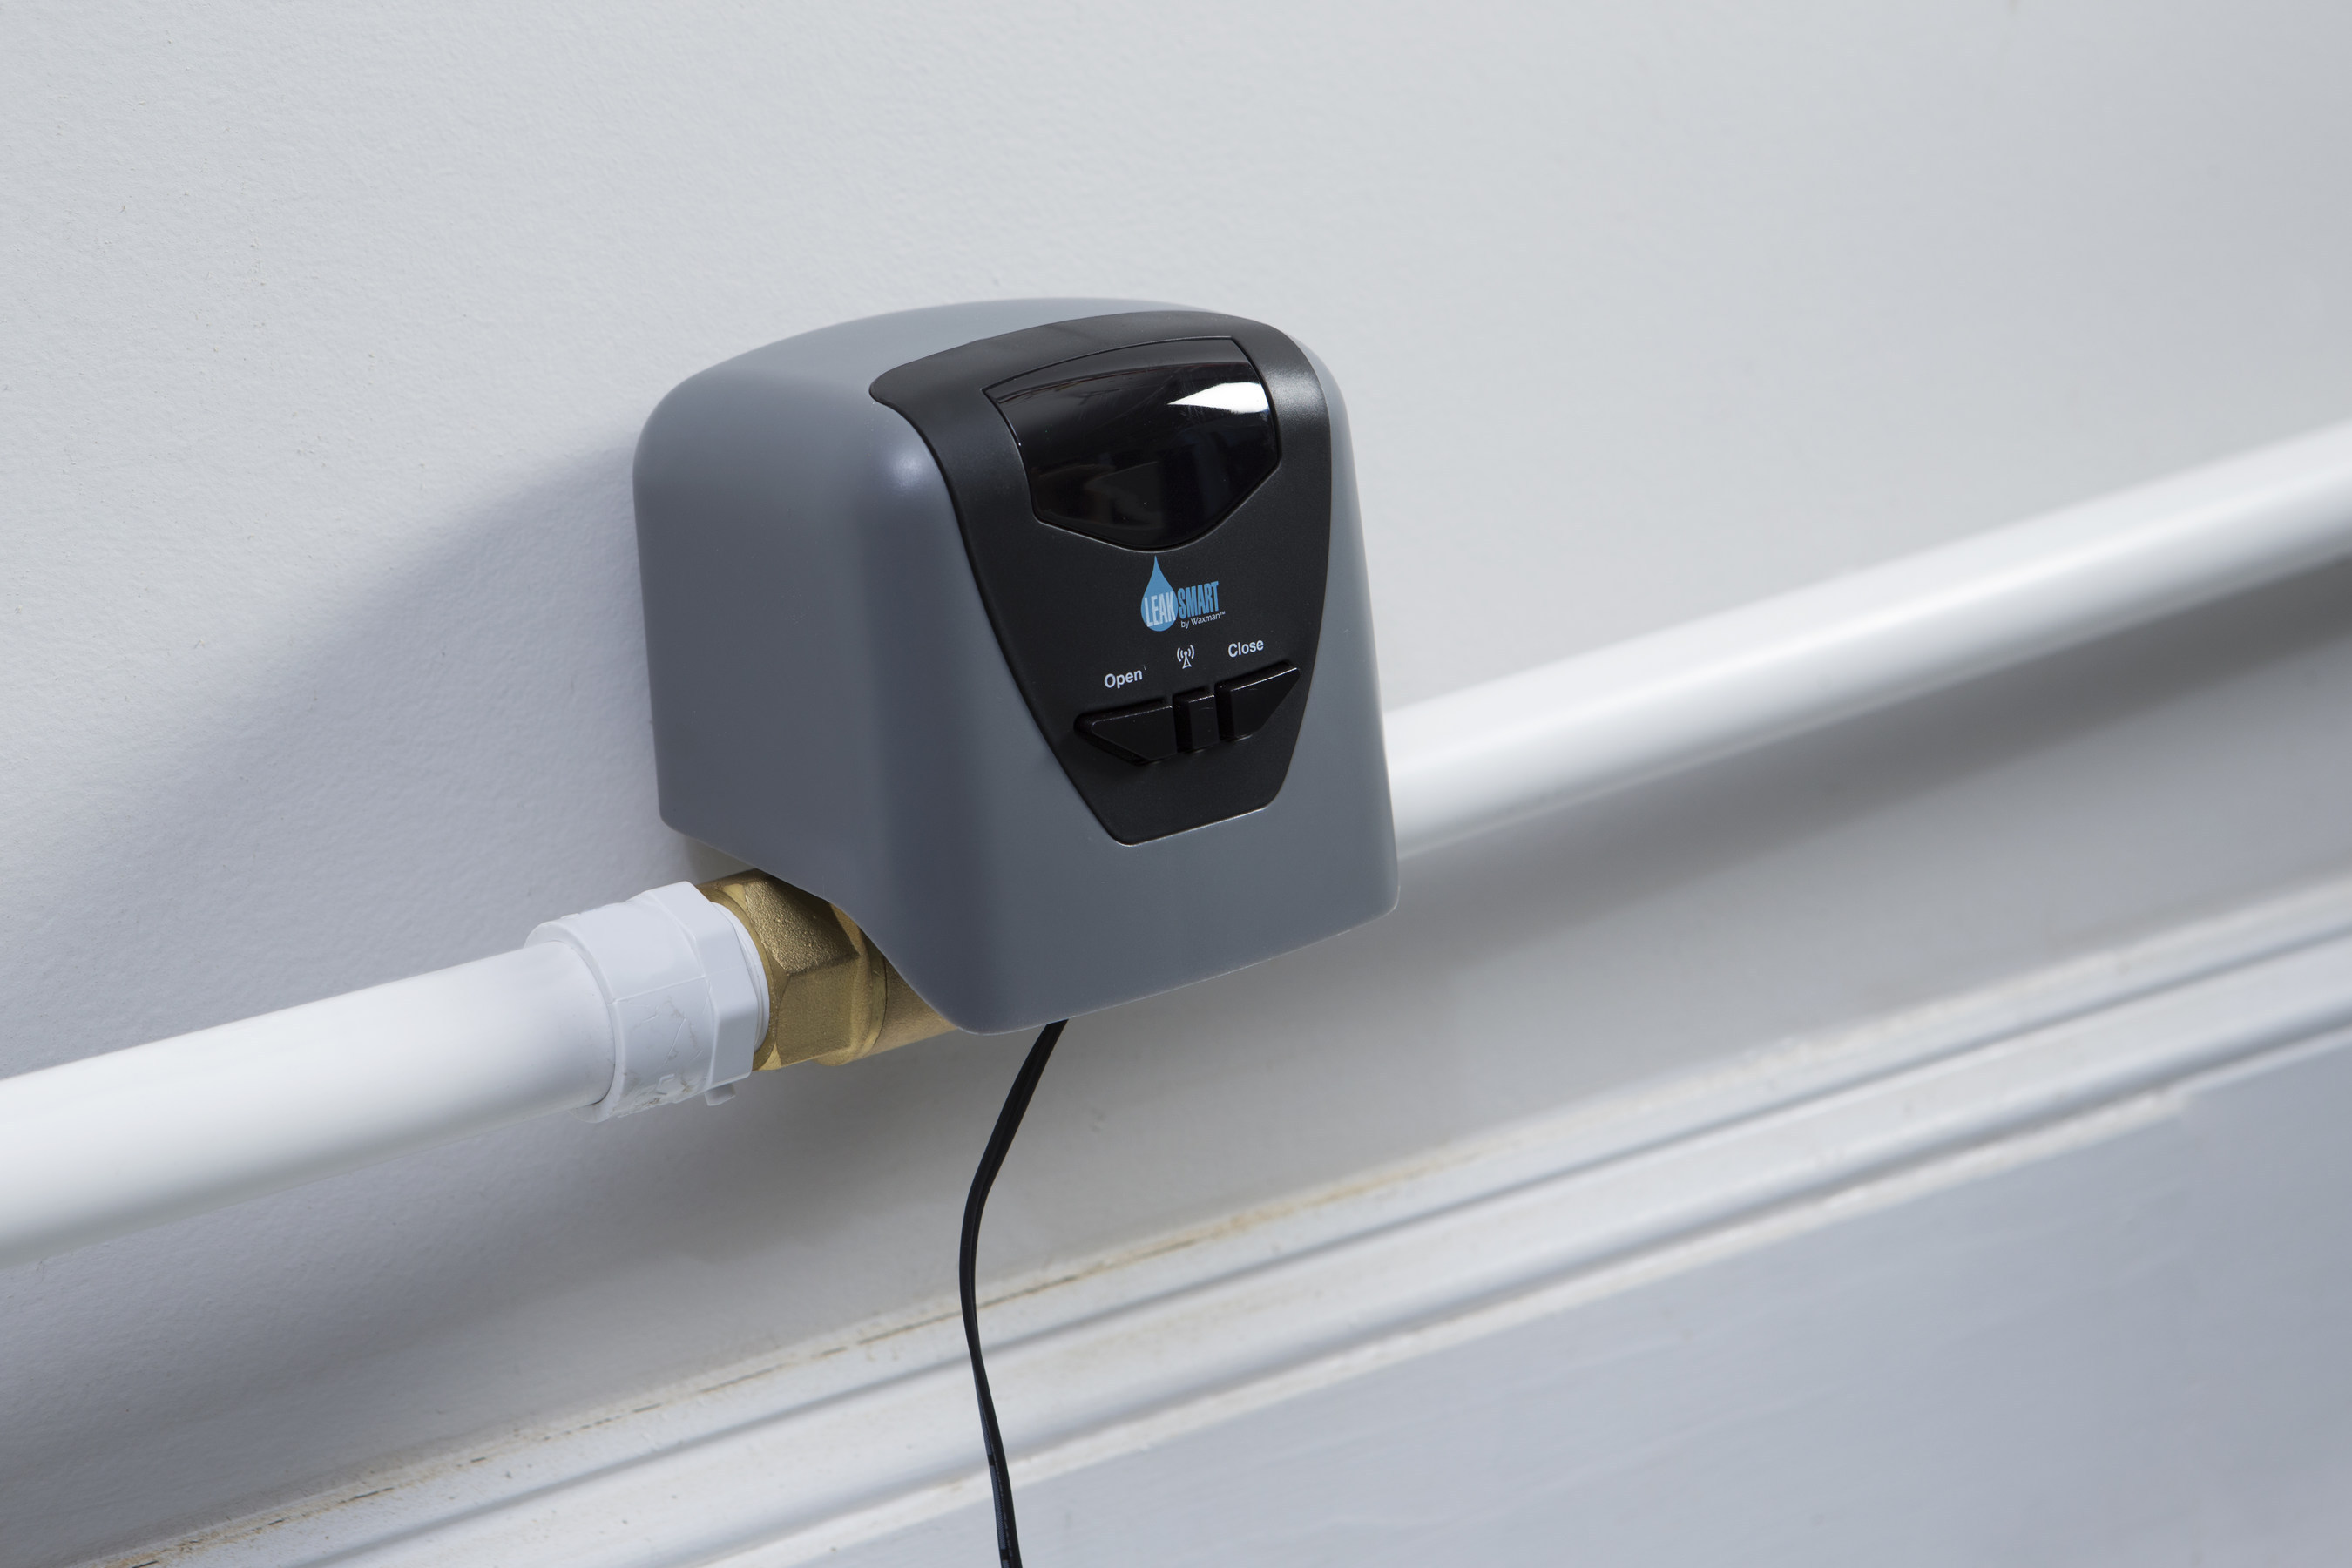 The Smart Valve is the first of its kind to link to water leak detectors and temperature sensors to automatically shut off the water supply if there is a leak detected or the temperature is too low, protecting homes from flooding and potentially costly repairs.